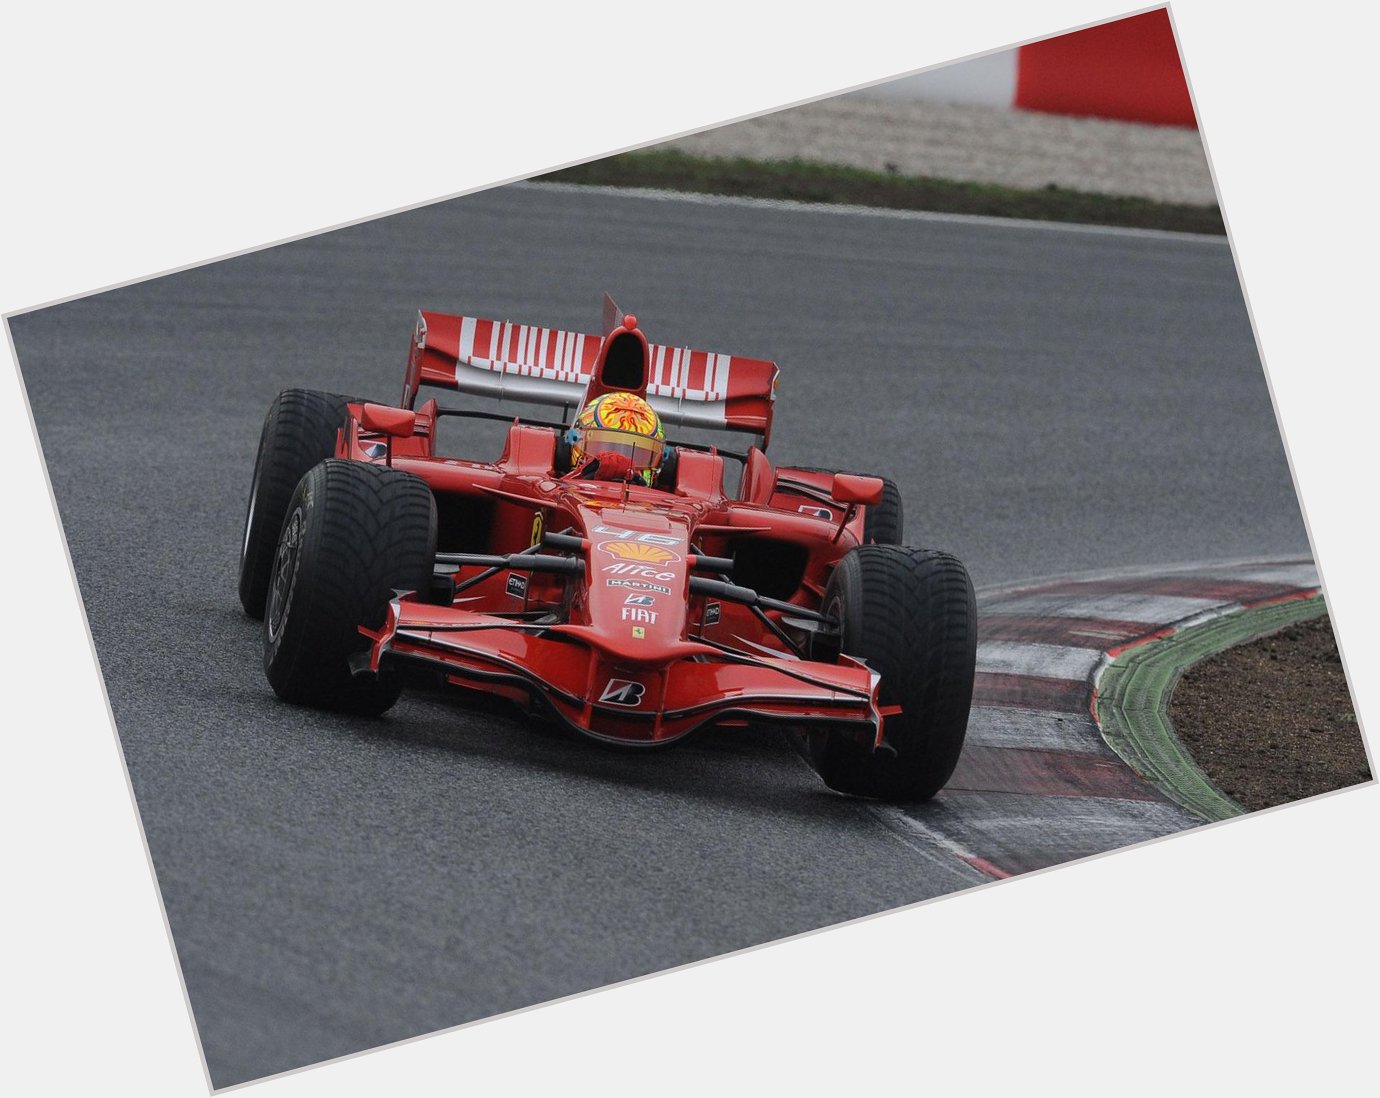 Happy Birthday to legend Valentino Rossi! Here he is testing a Ferrari in 2008  